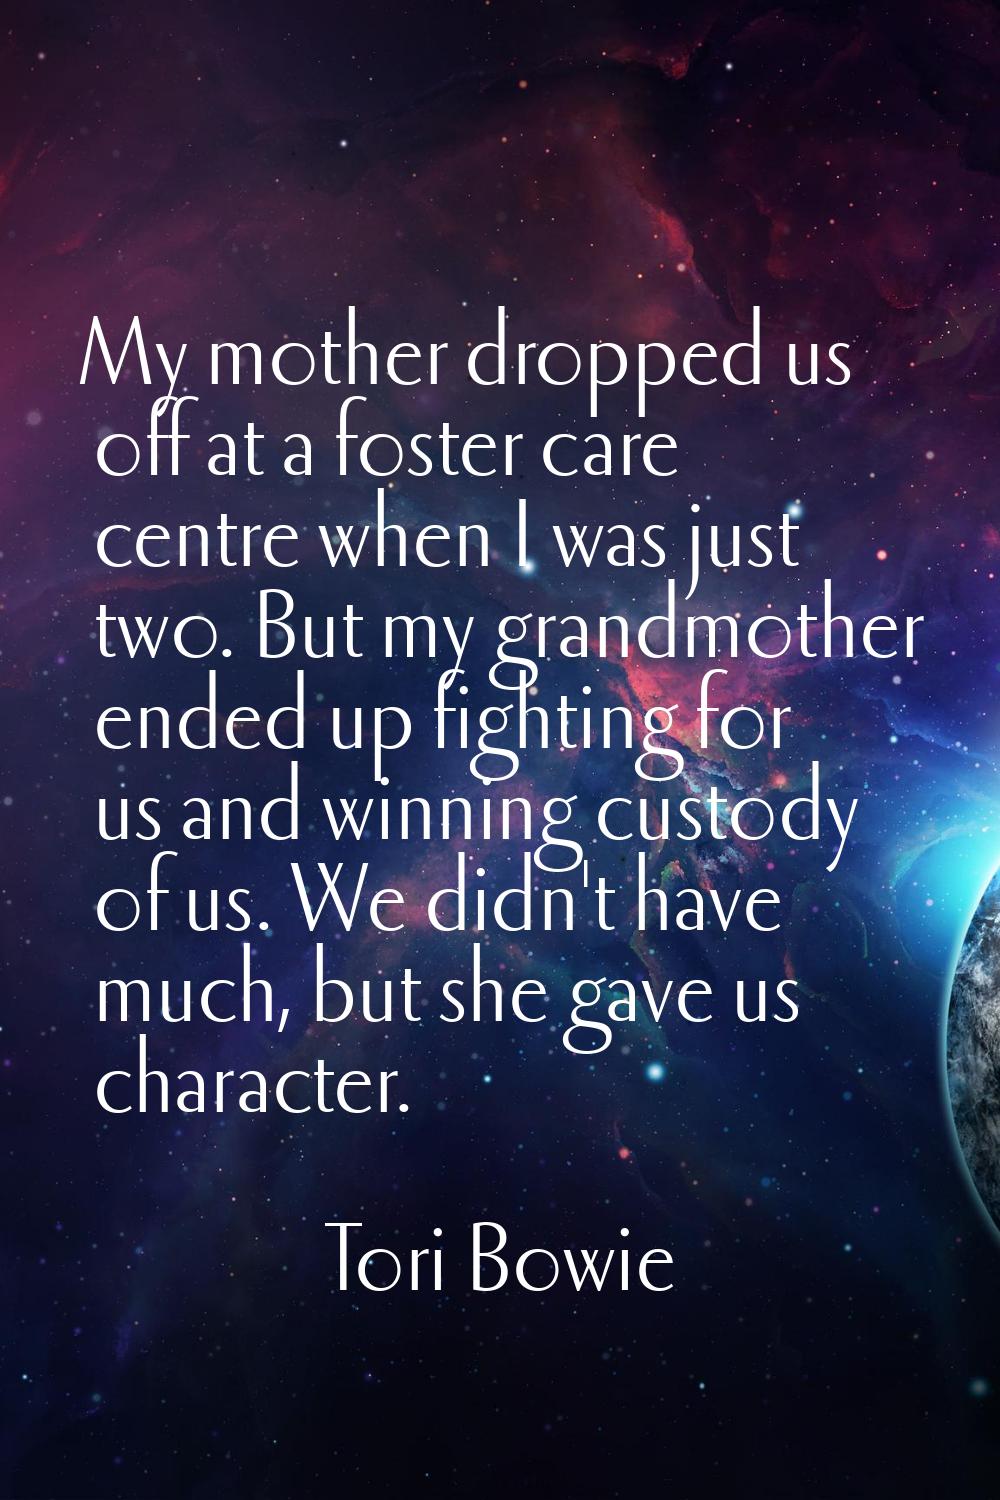 My mother dropped us off at a foster care centre when I was just two. But my grandmother ended up f